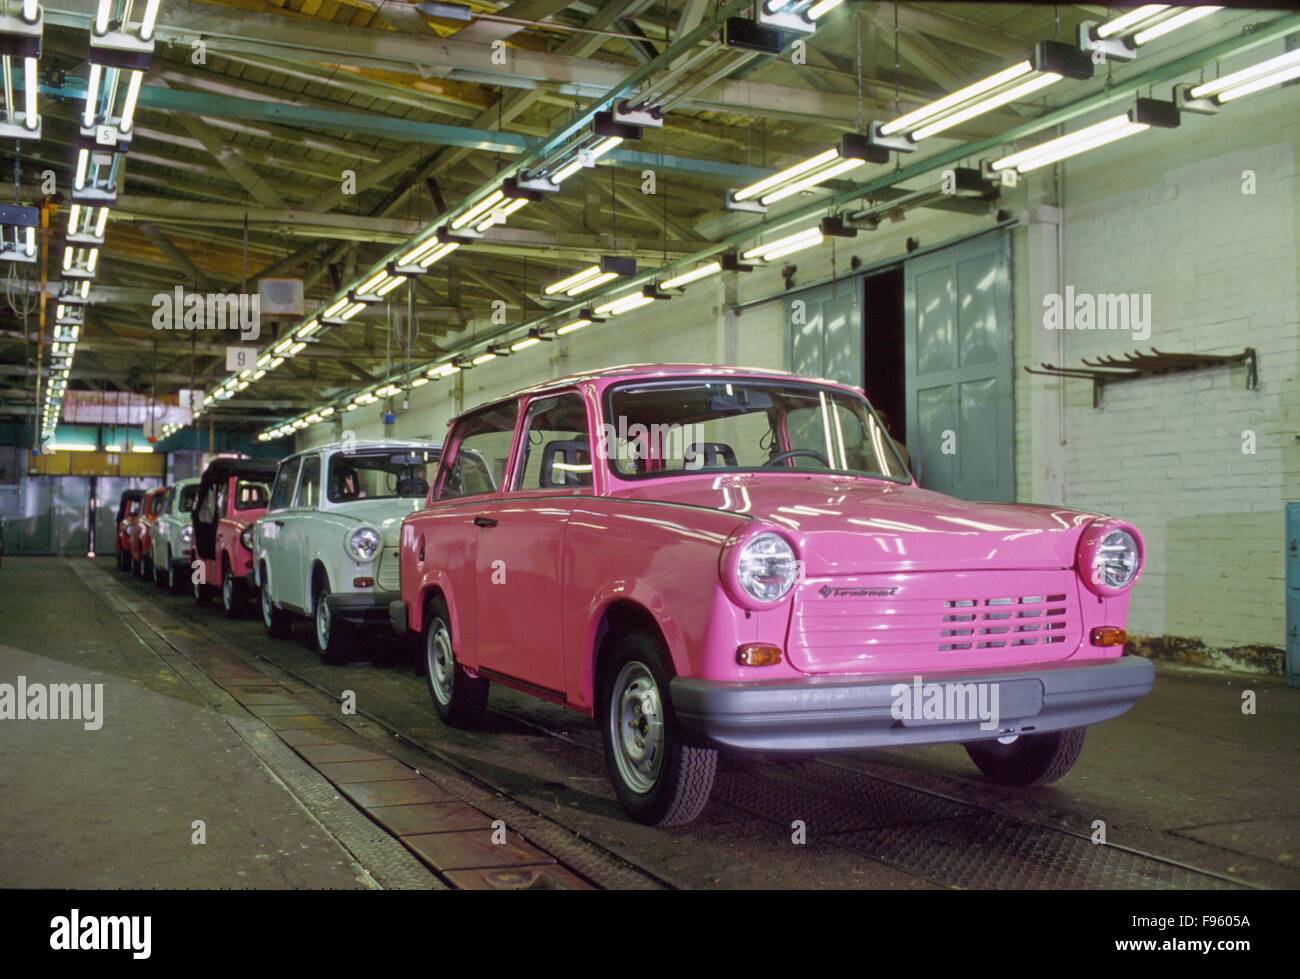 30/04/1991 - Ceremony for the last Trabant cars that leave the factory VEB Sachsenring Zwickau Automobilwerke after reunification between the German Democratic Republic (DDR) and the Federal Republic of Germany (BRD)    - le ultime automobili Trabant escono dallo stabilimento VEB Sachsenring Automobilwerke di Zwickau dopo la riunificazione fra Repubblica Democratica Tedesca (DDR) e Repubblica Federale Tedesca (RFT) Stock Photo